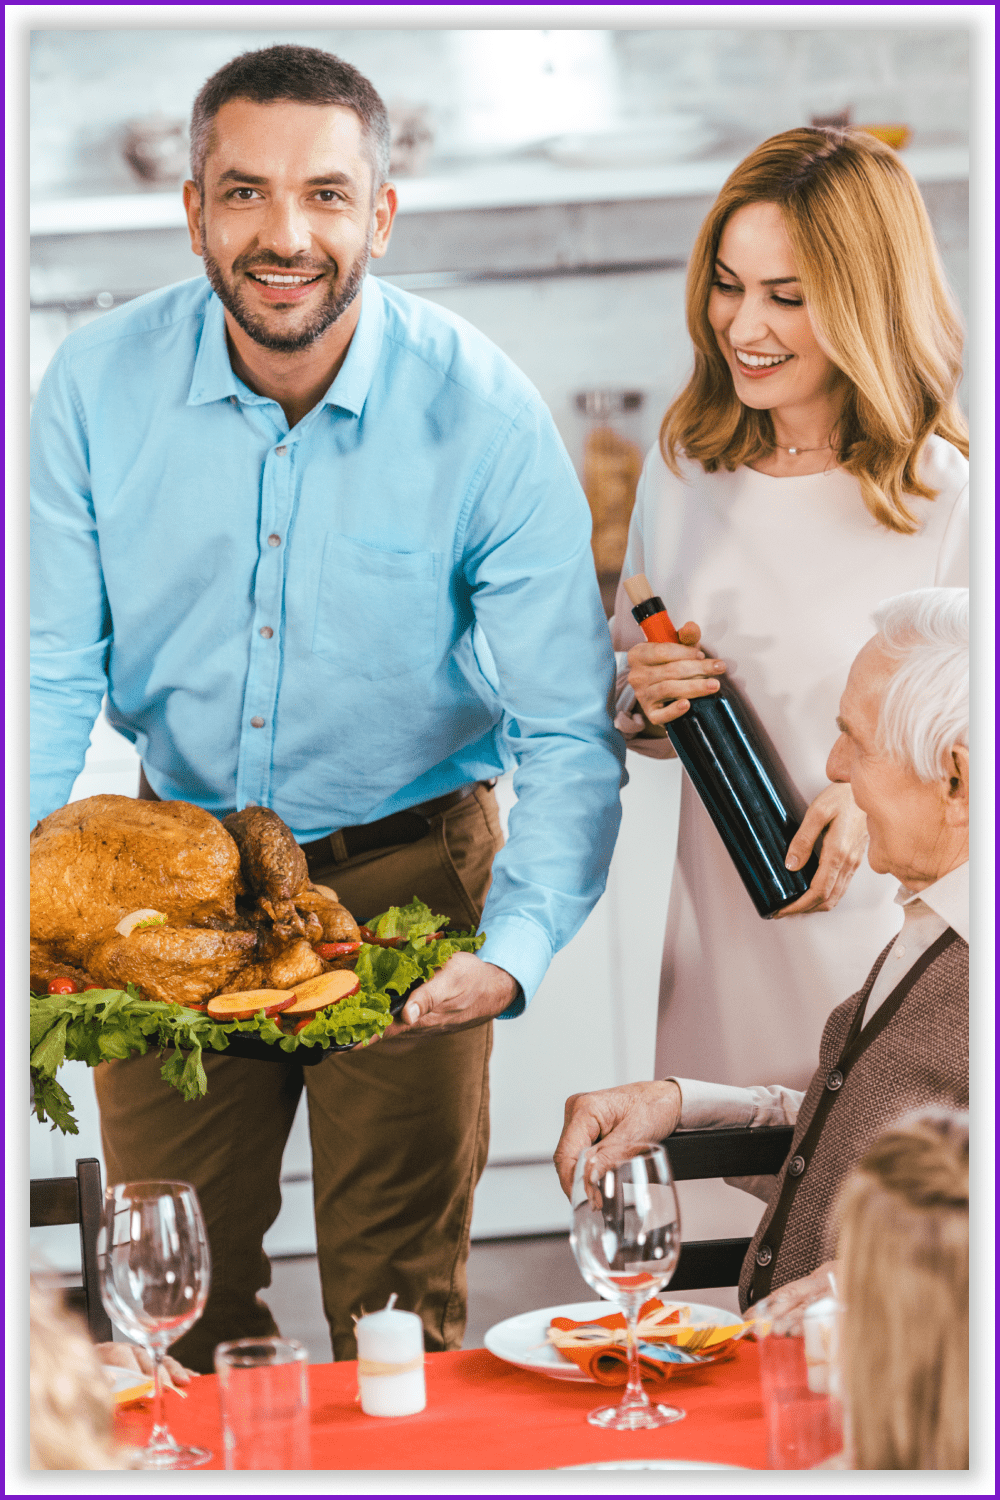 A man holds a tray with a ready-made turkey, his wife is next to him with a bottle of wine in her hands.